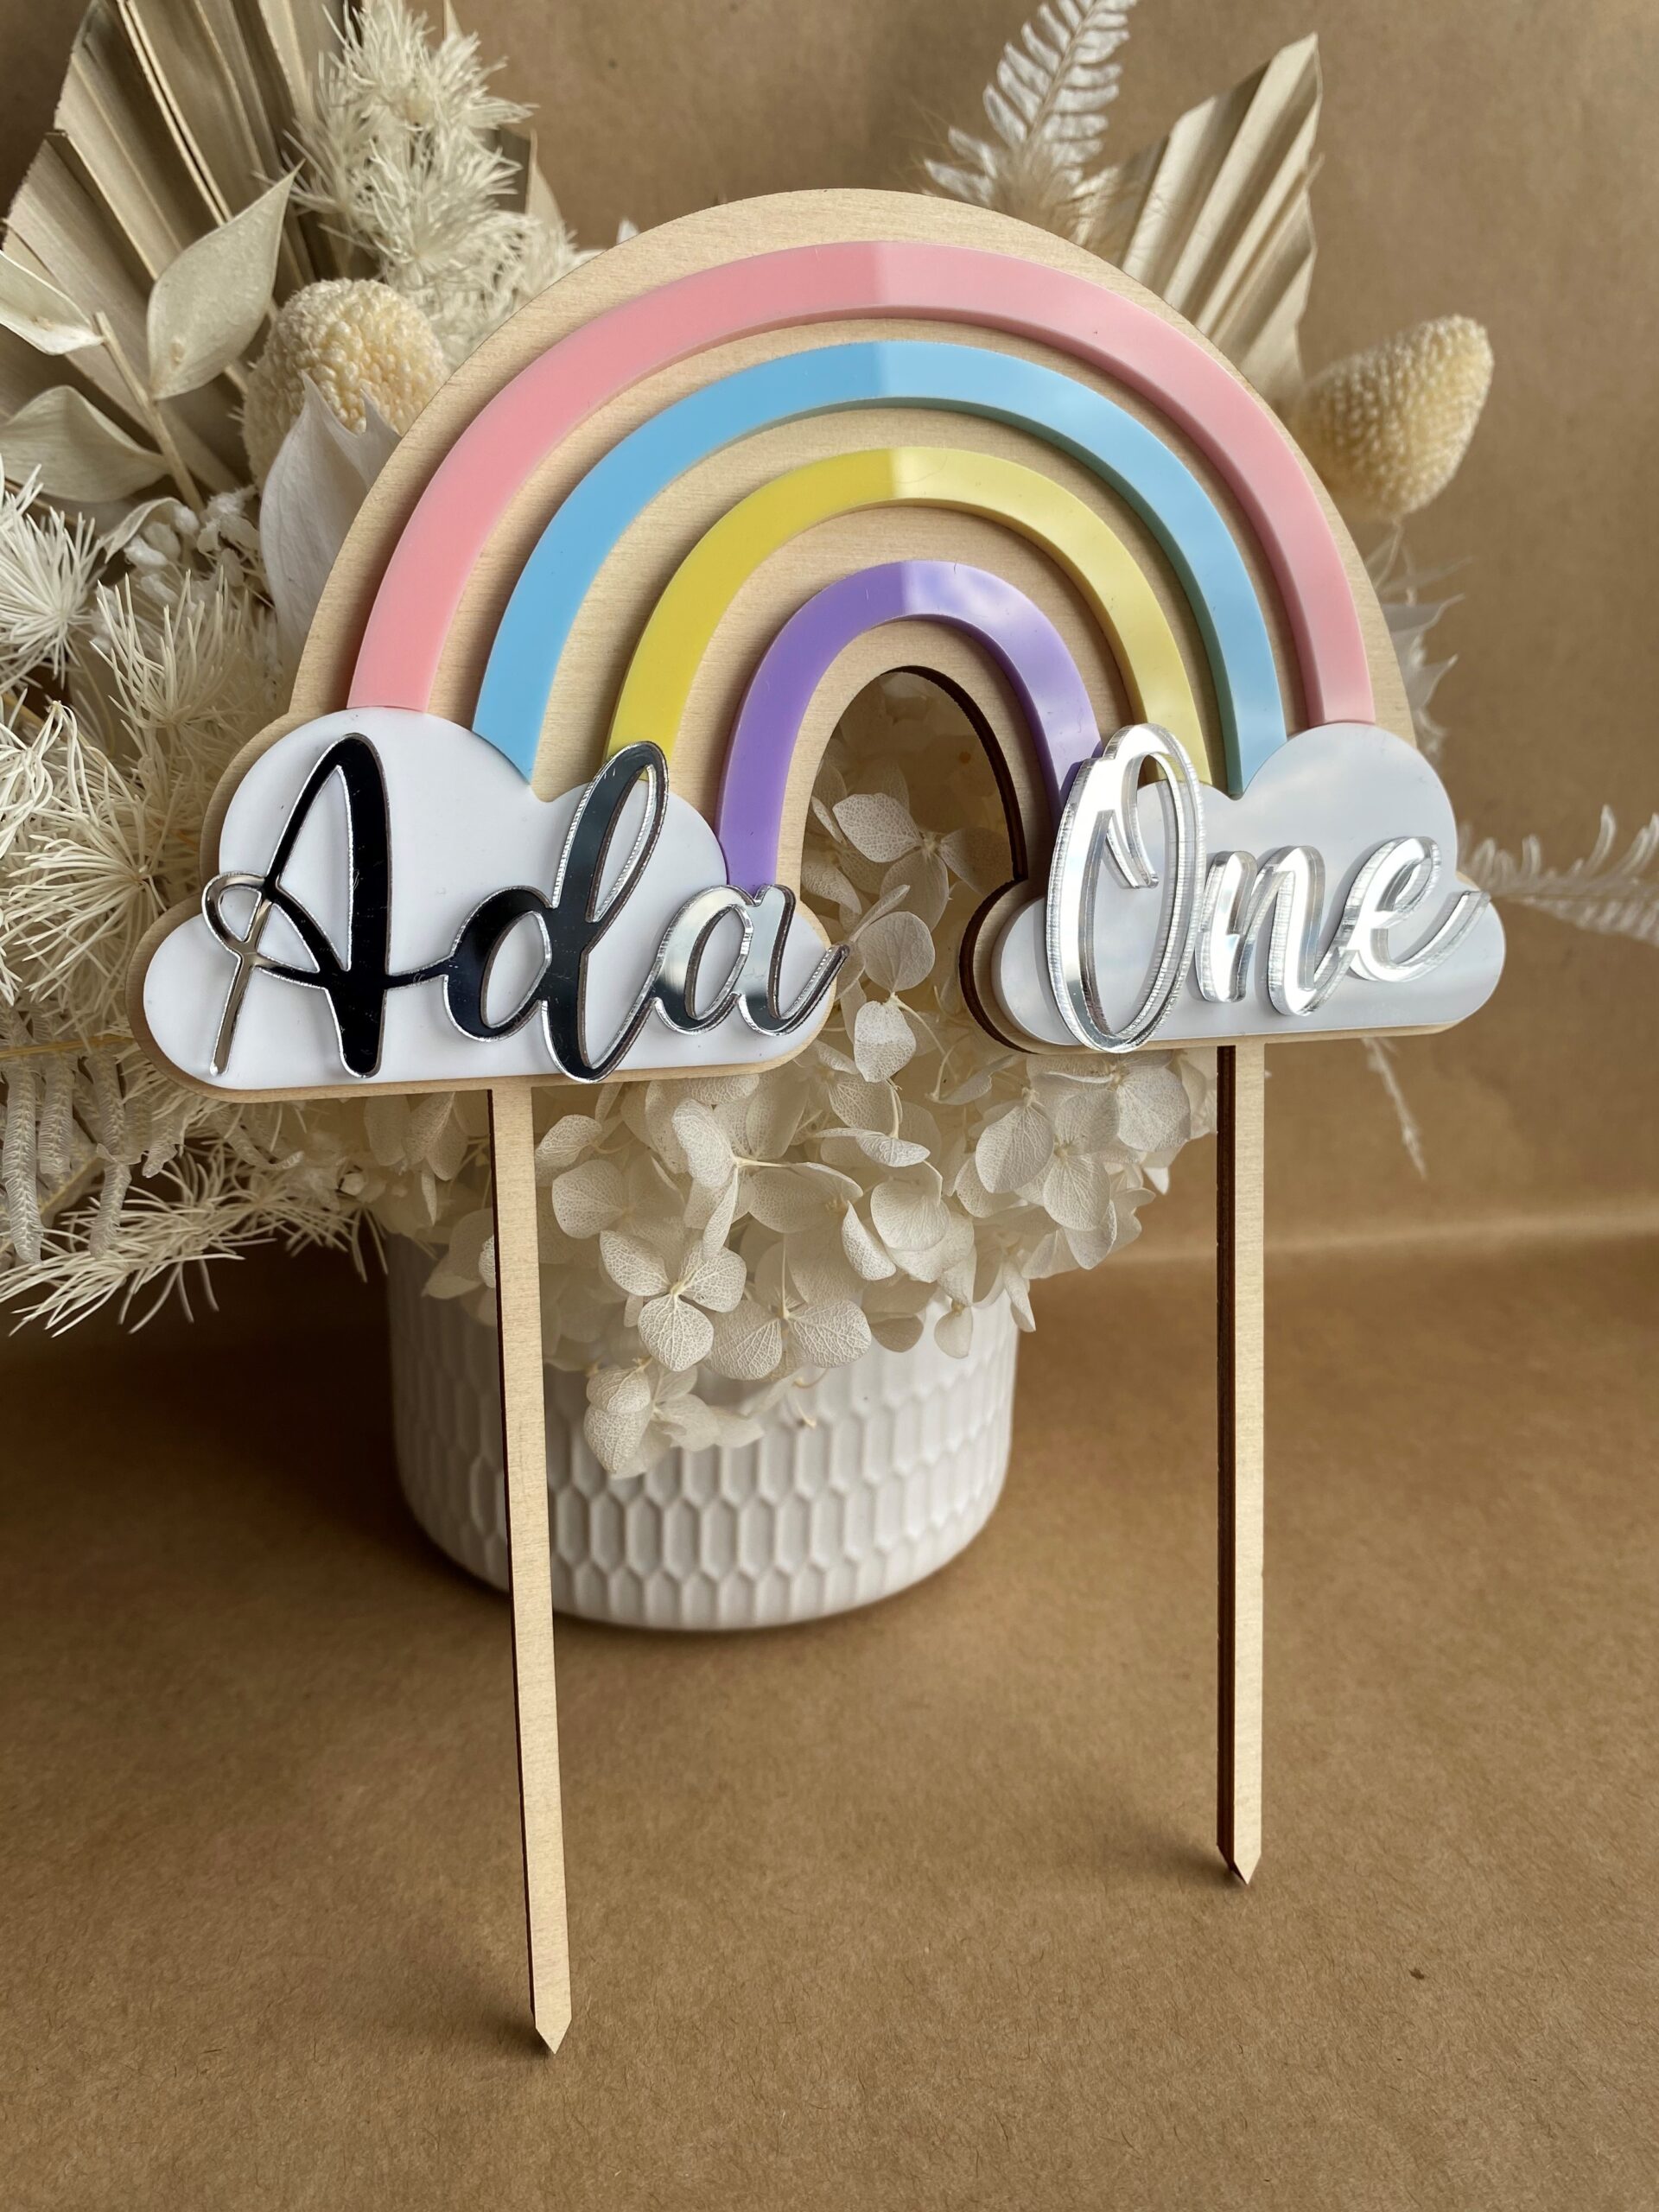 Rainbow with Clouds Cake Toppers | Country Kitchen SweetArt